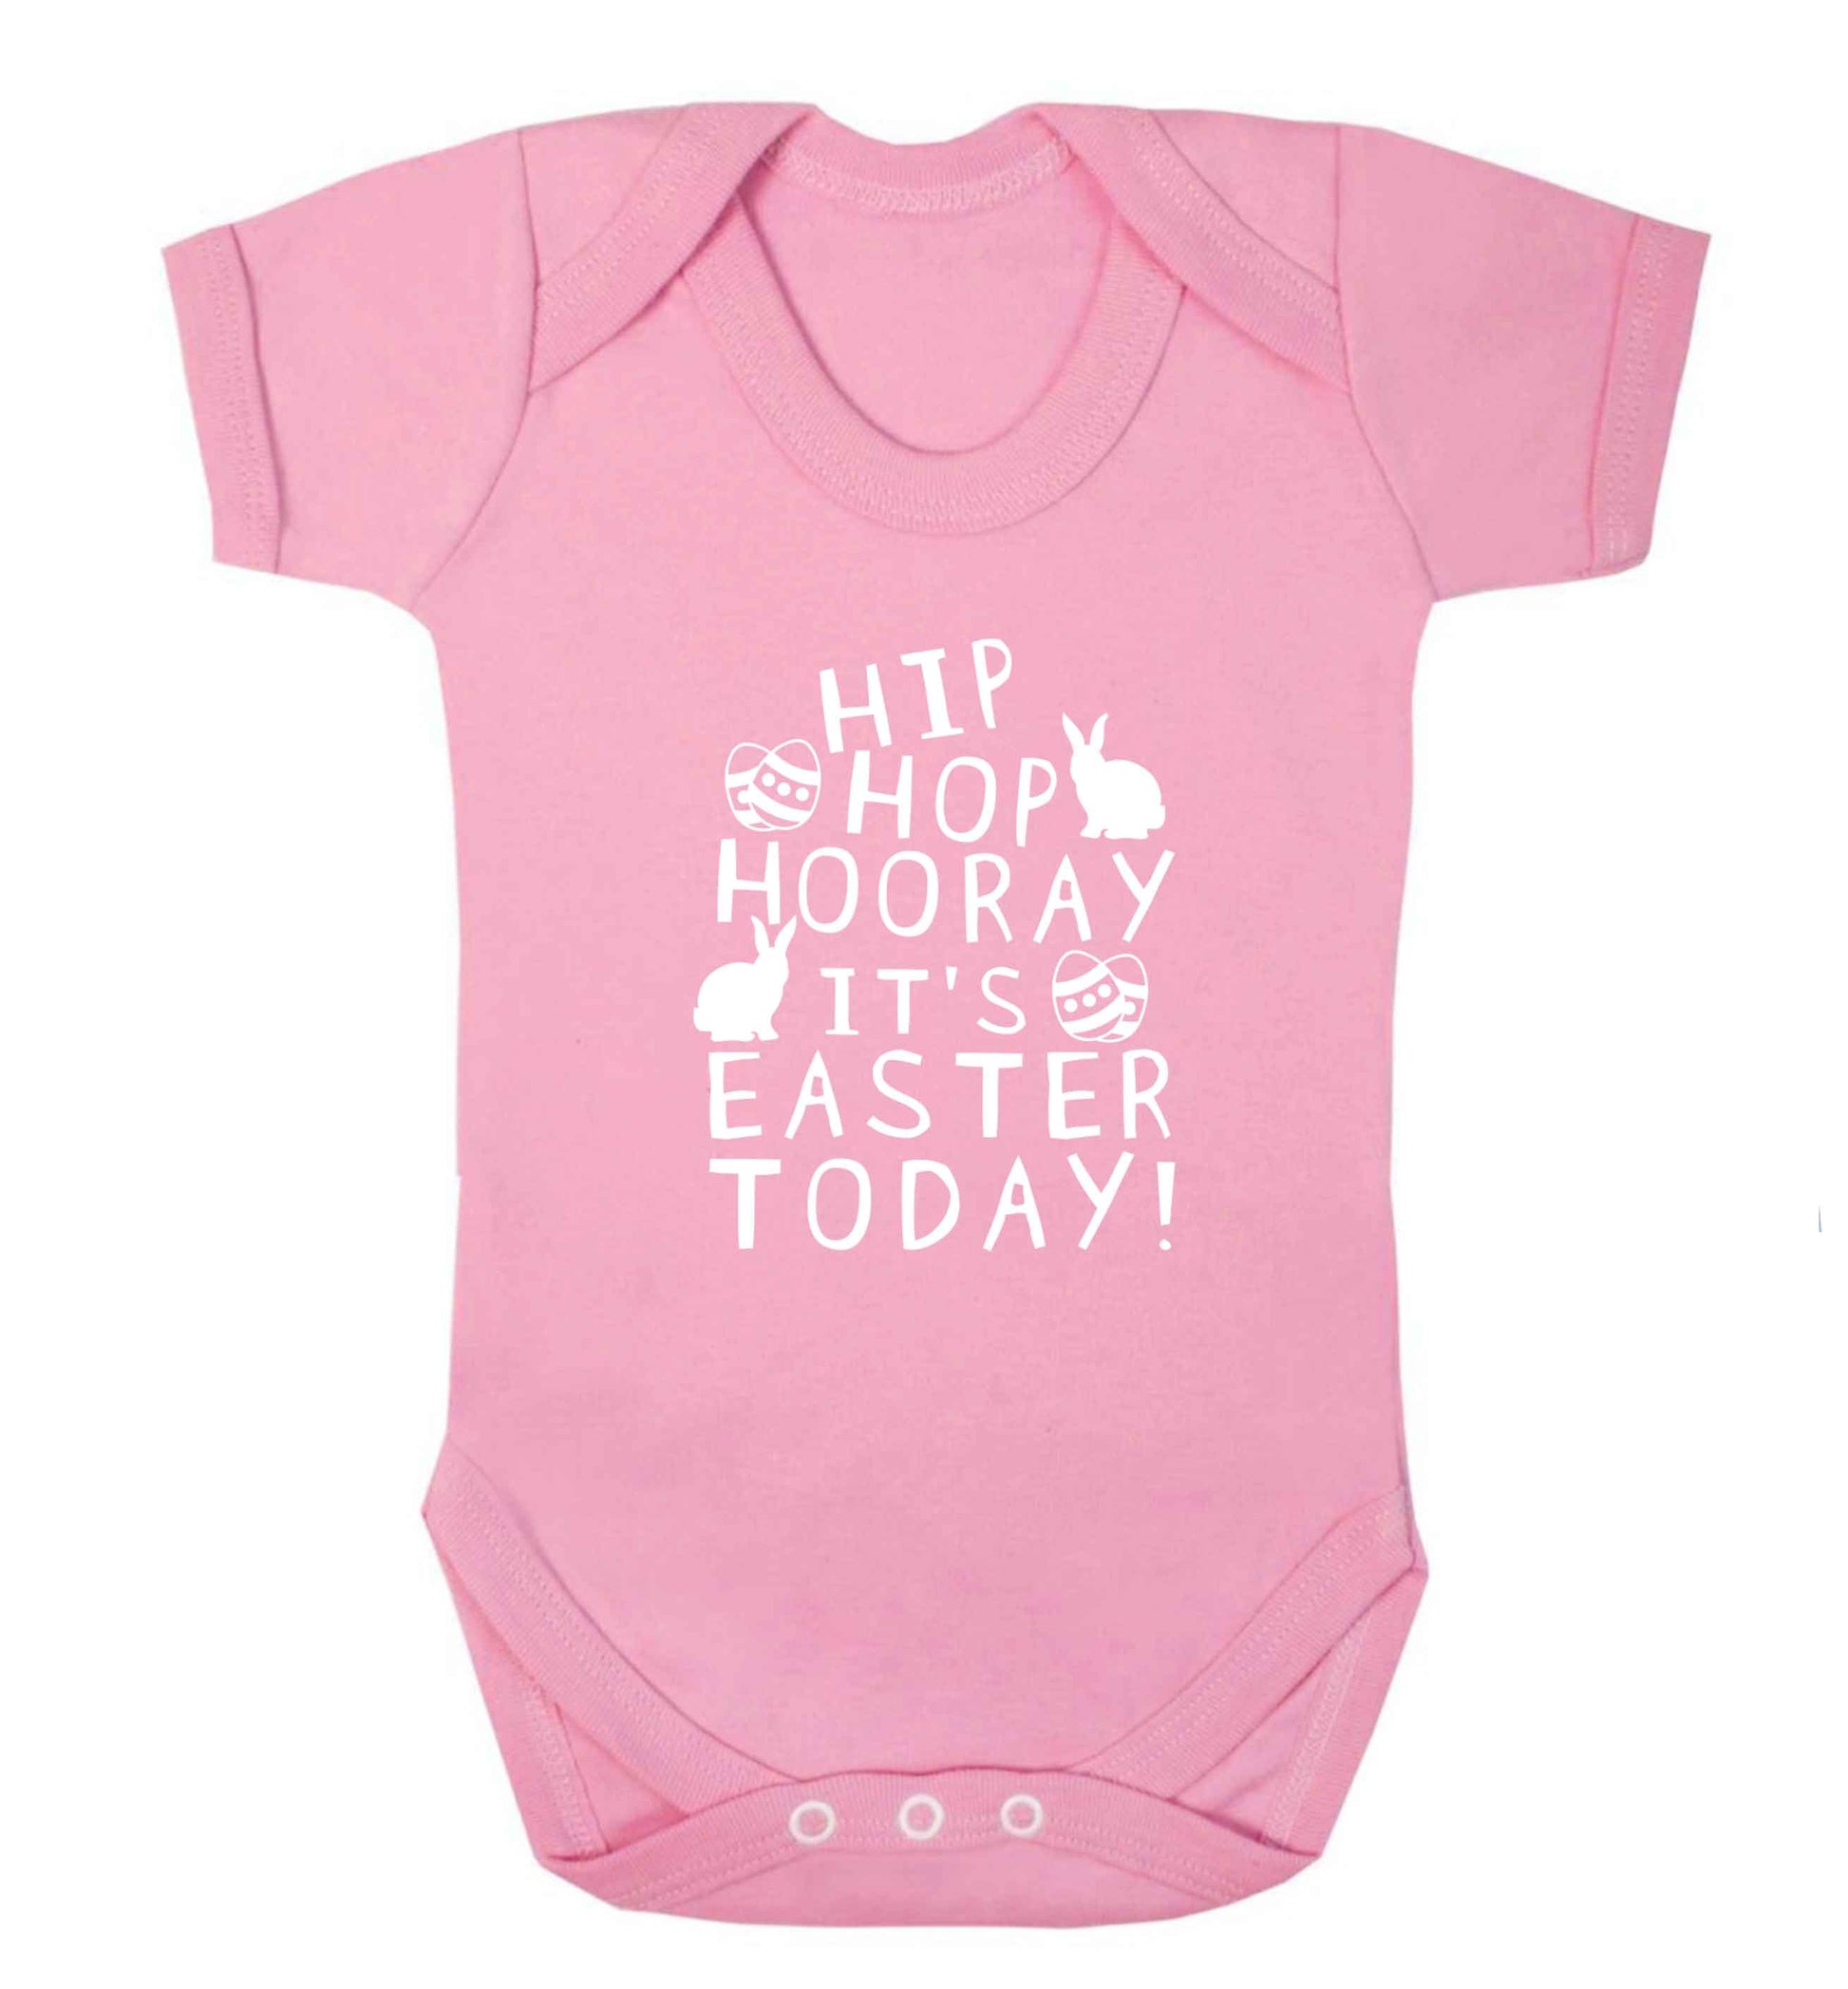 Hip hip hooray it's Easter today! baby vest pale pink 18-24 months